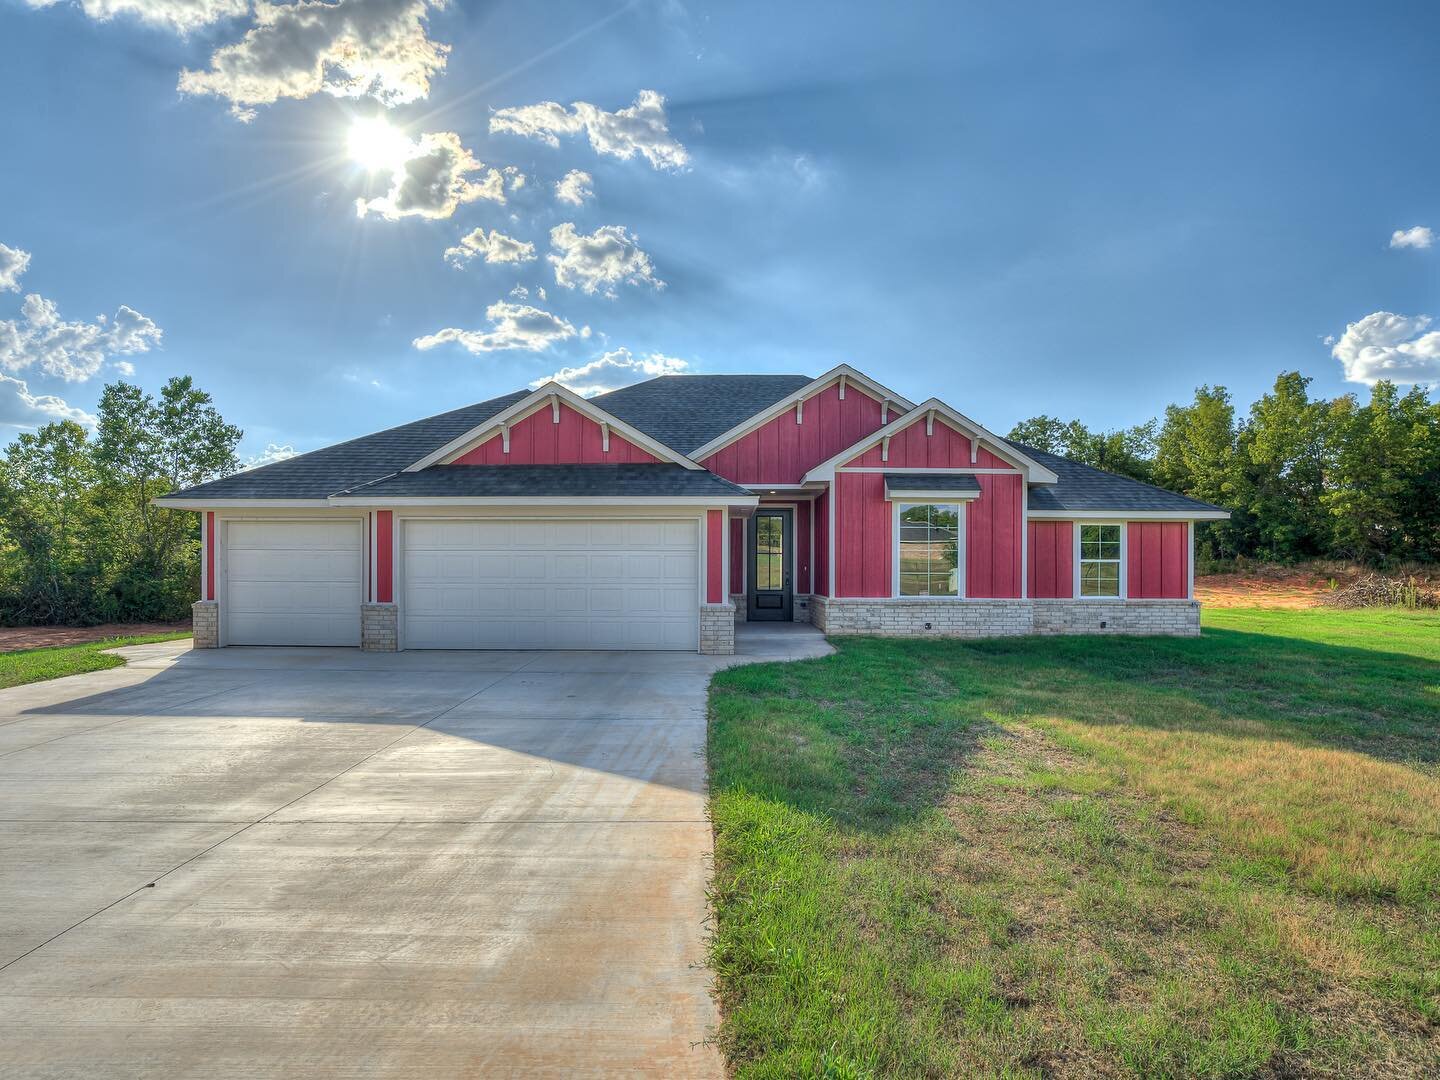 Beautiful new home available in The Landing neighborhood!

10101 Amber Circle, Newalla, OK
3 bedroom | 2 bath | 3 car garage + Study
2,200+ square feet

This beautifully designed home is on a 1+ acre lot with convenient access to I-40, the Kickapoo T